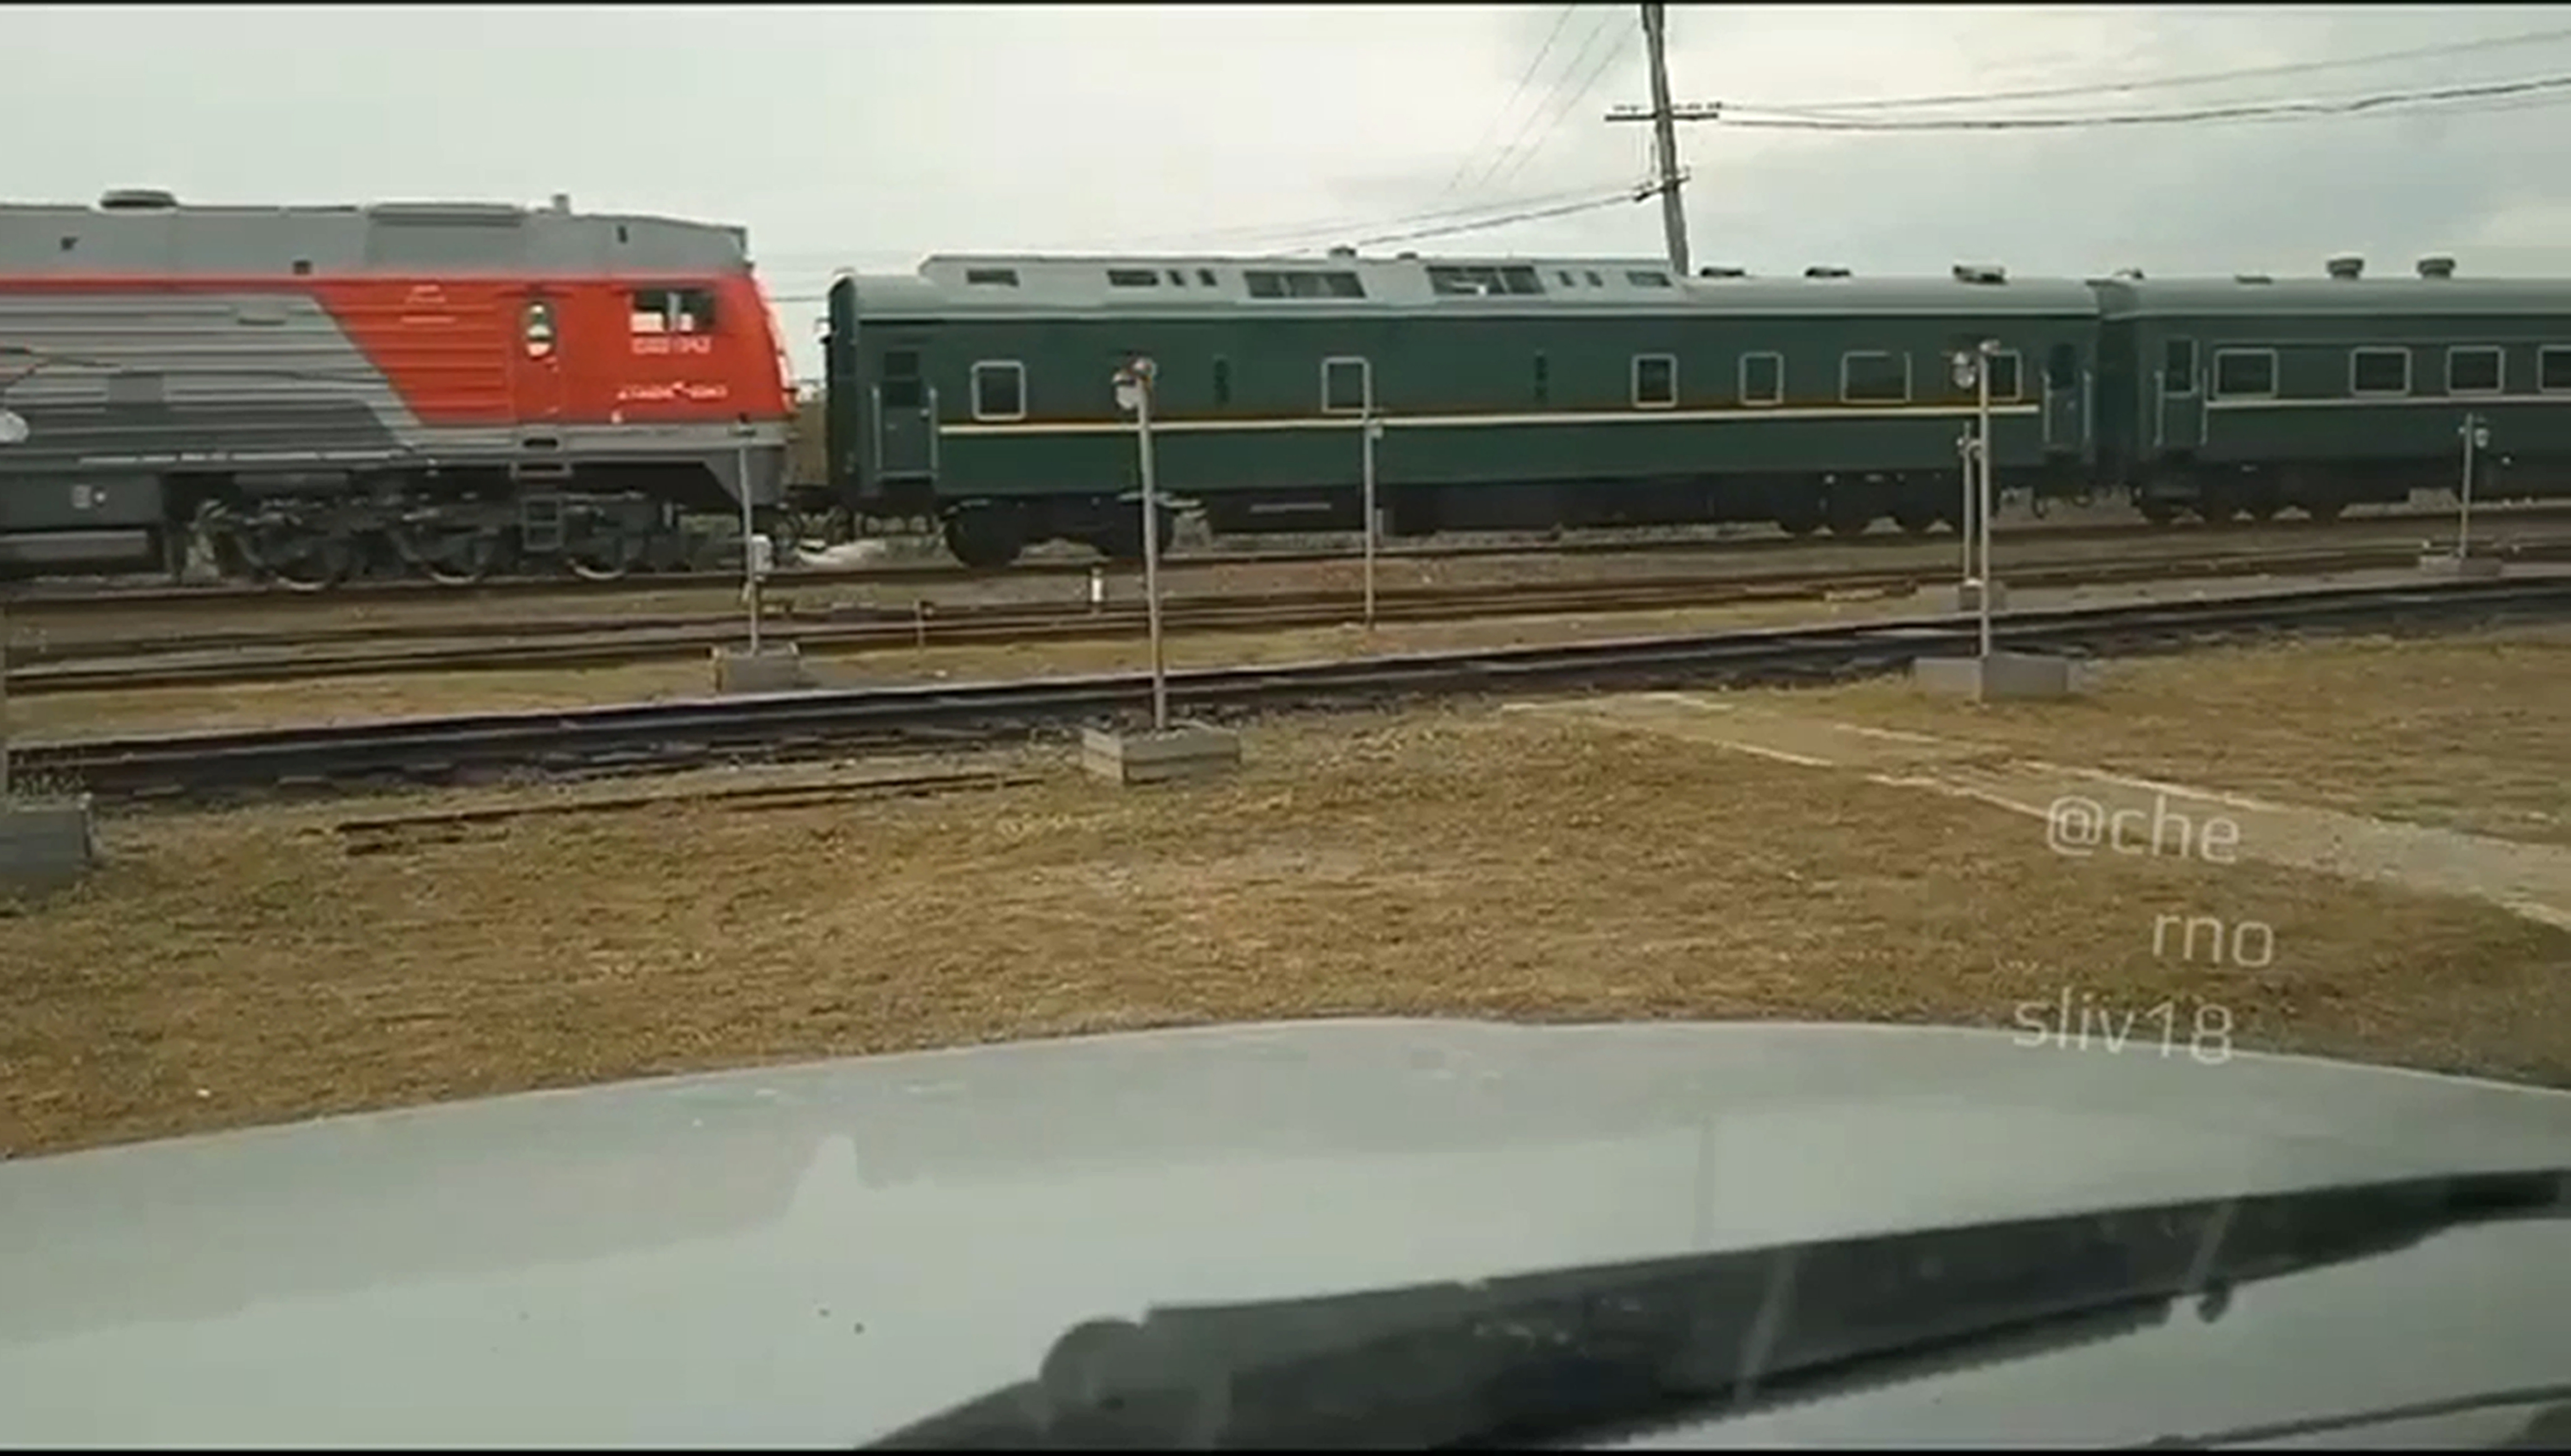 A green train with yellow trimmings, resembling one used by North Korean leader Kim Jong Un on his previous travels, is seen steaming near Khasan, about 127 km (79 miles) south of Vladivostok, Russia, on September 12 in this image taken from social media.